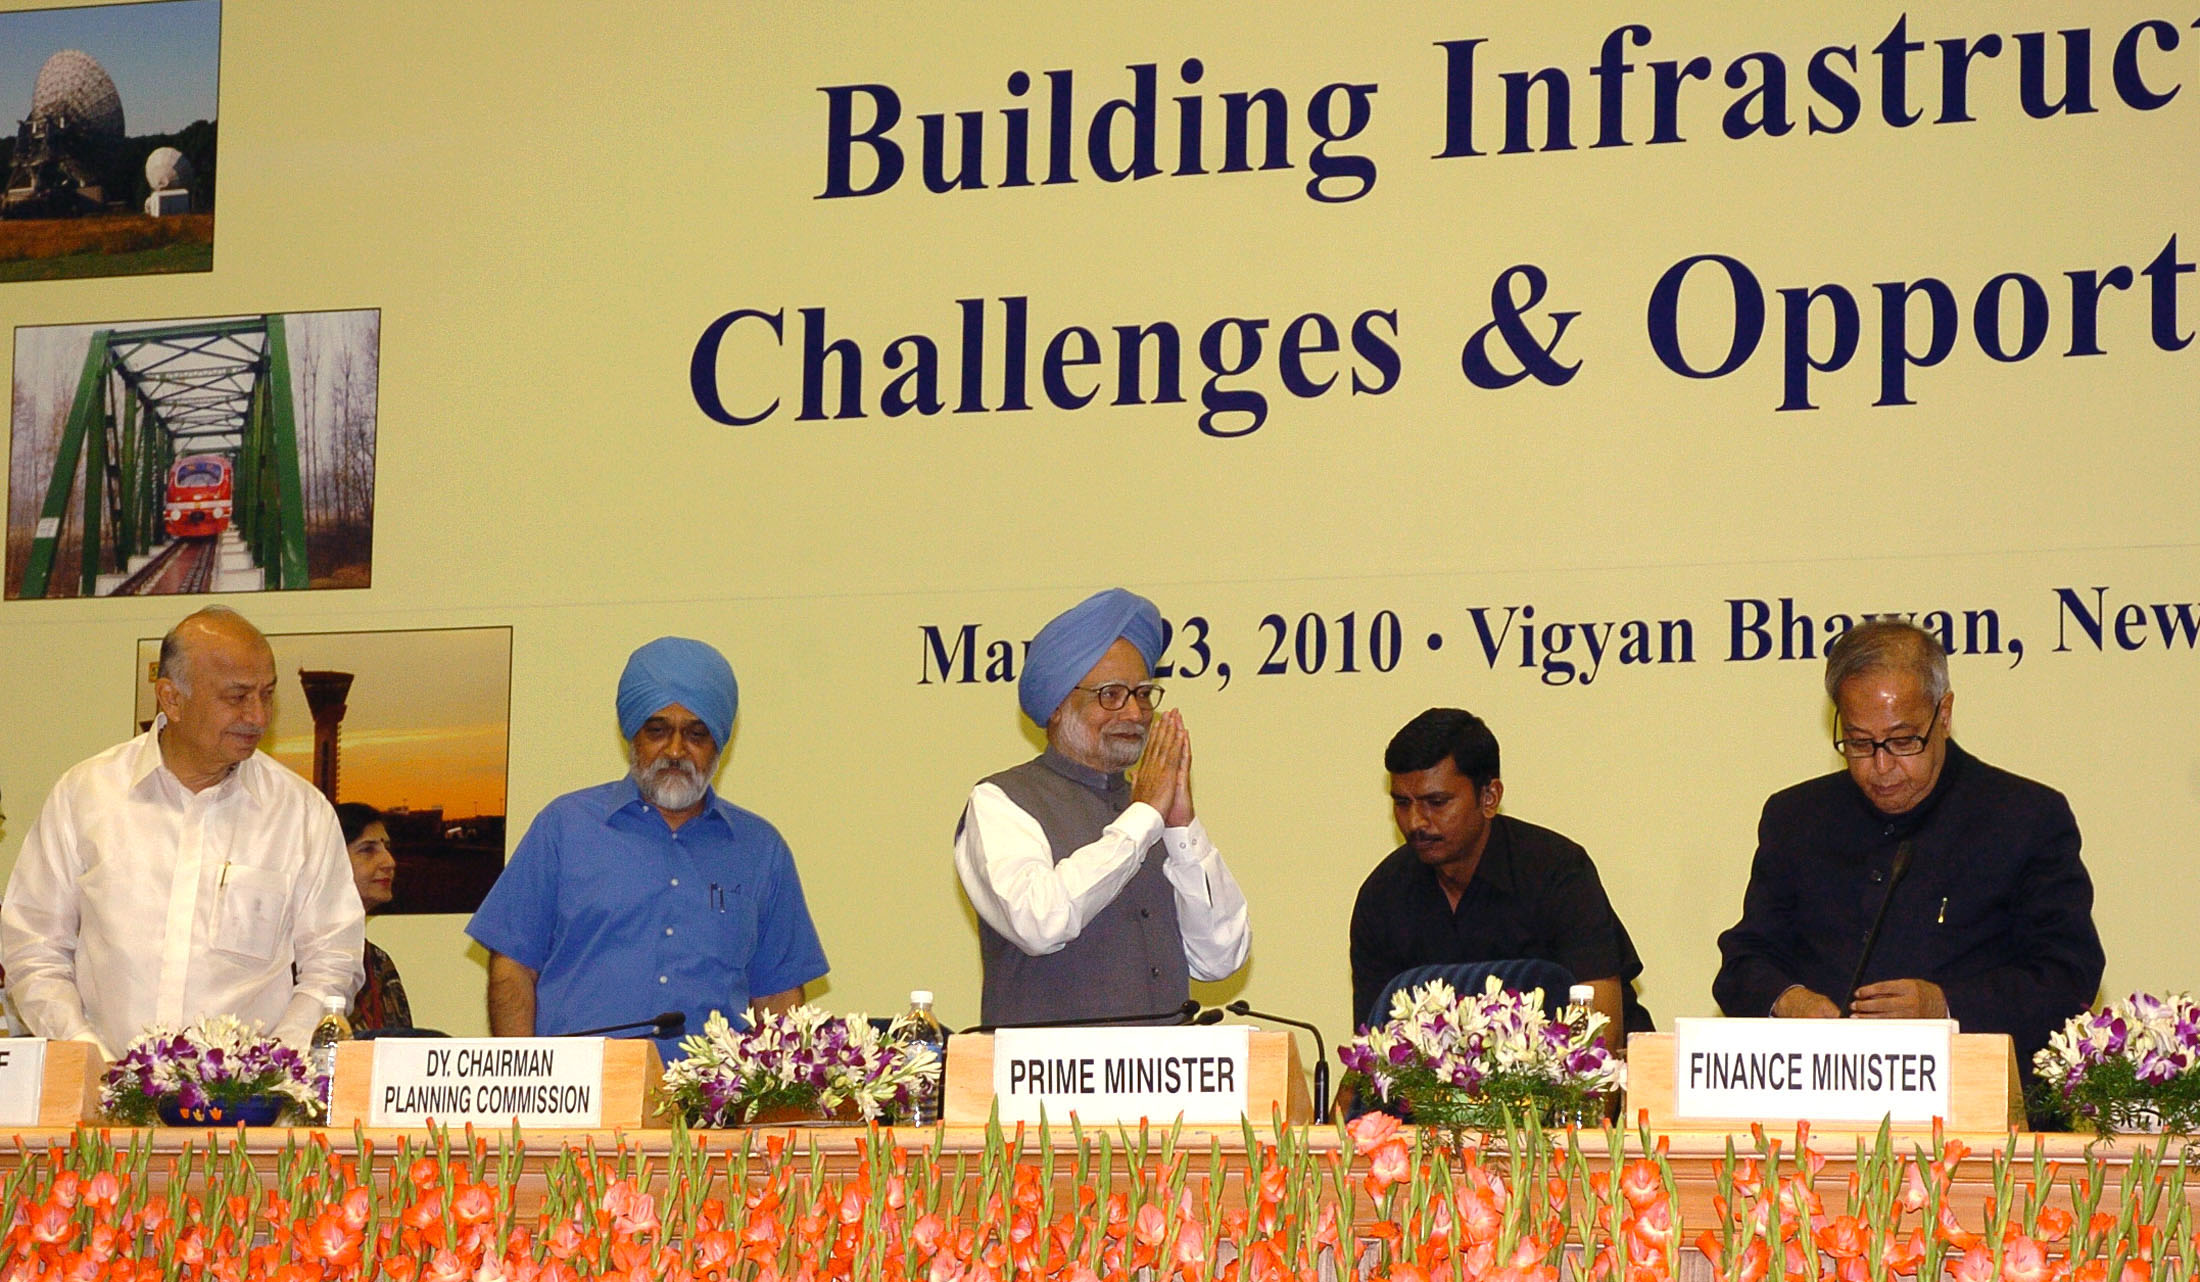 The Prime Minister, Dr. Manmohan Singh at the conference on Building Infrastructure: Challenges and Opportunities, at Vigyan Bhavan in New Delhi on March 23, 2010.